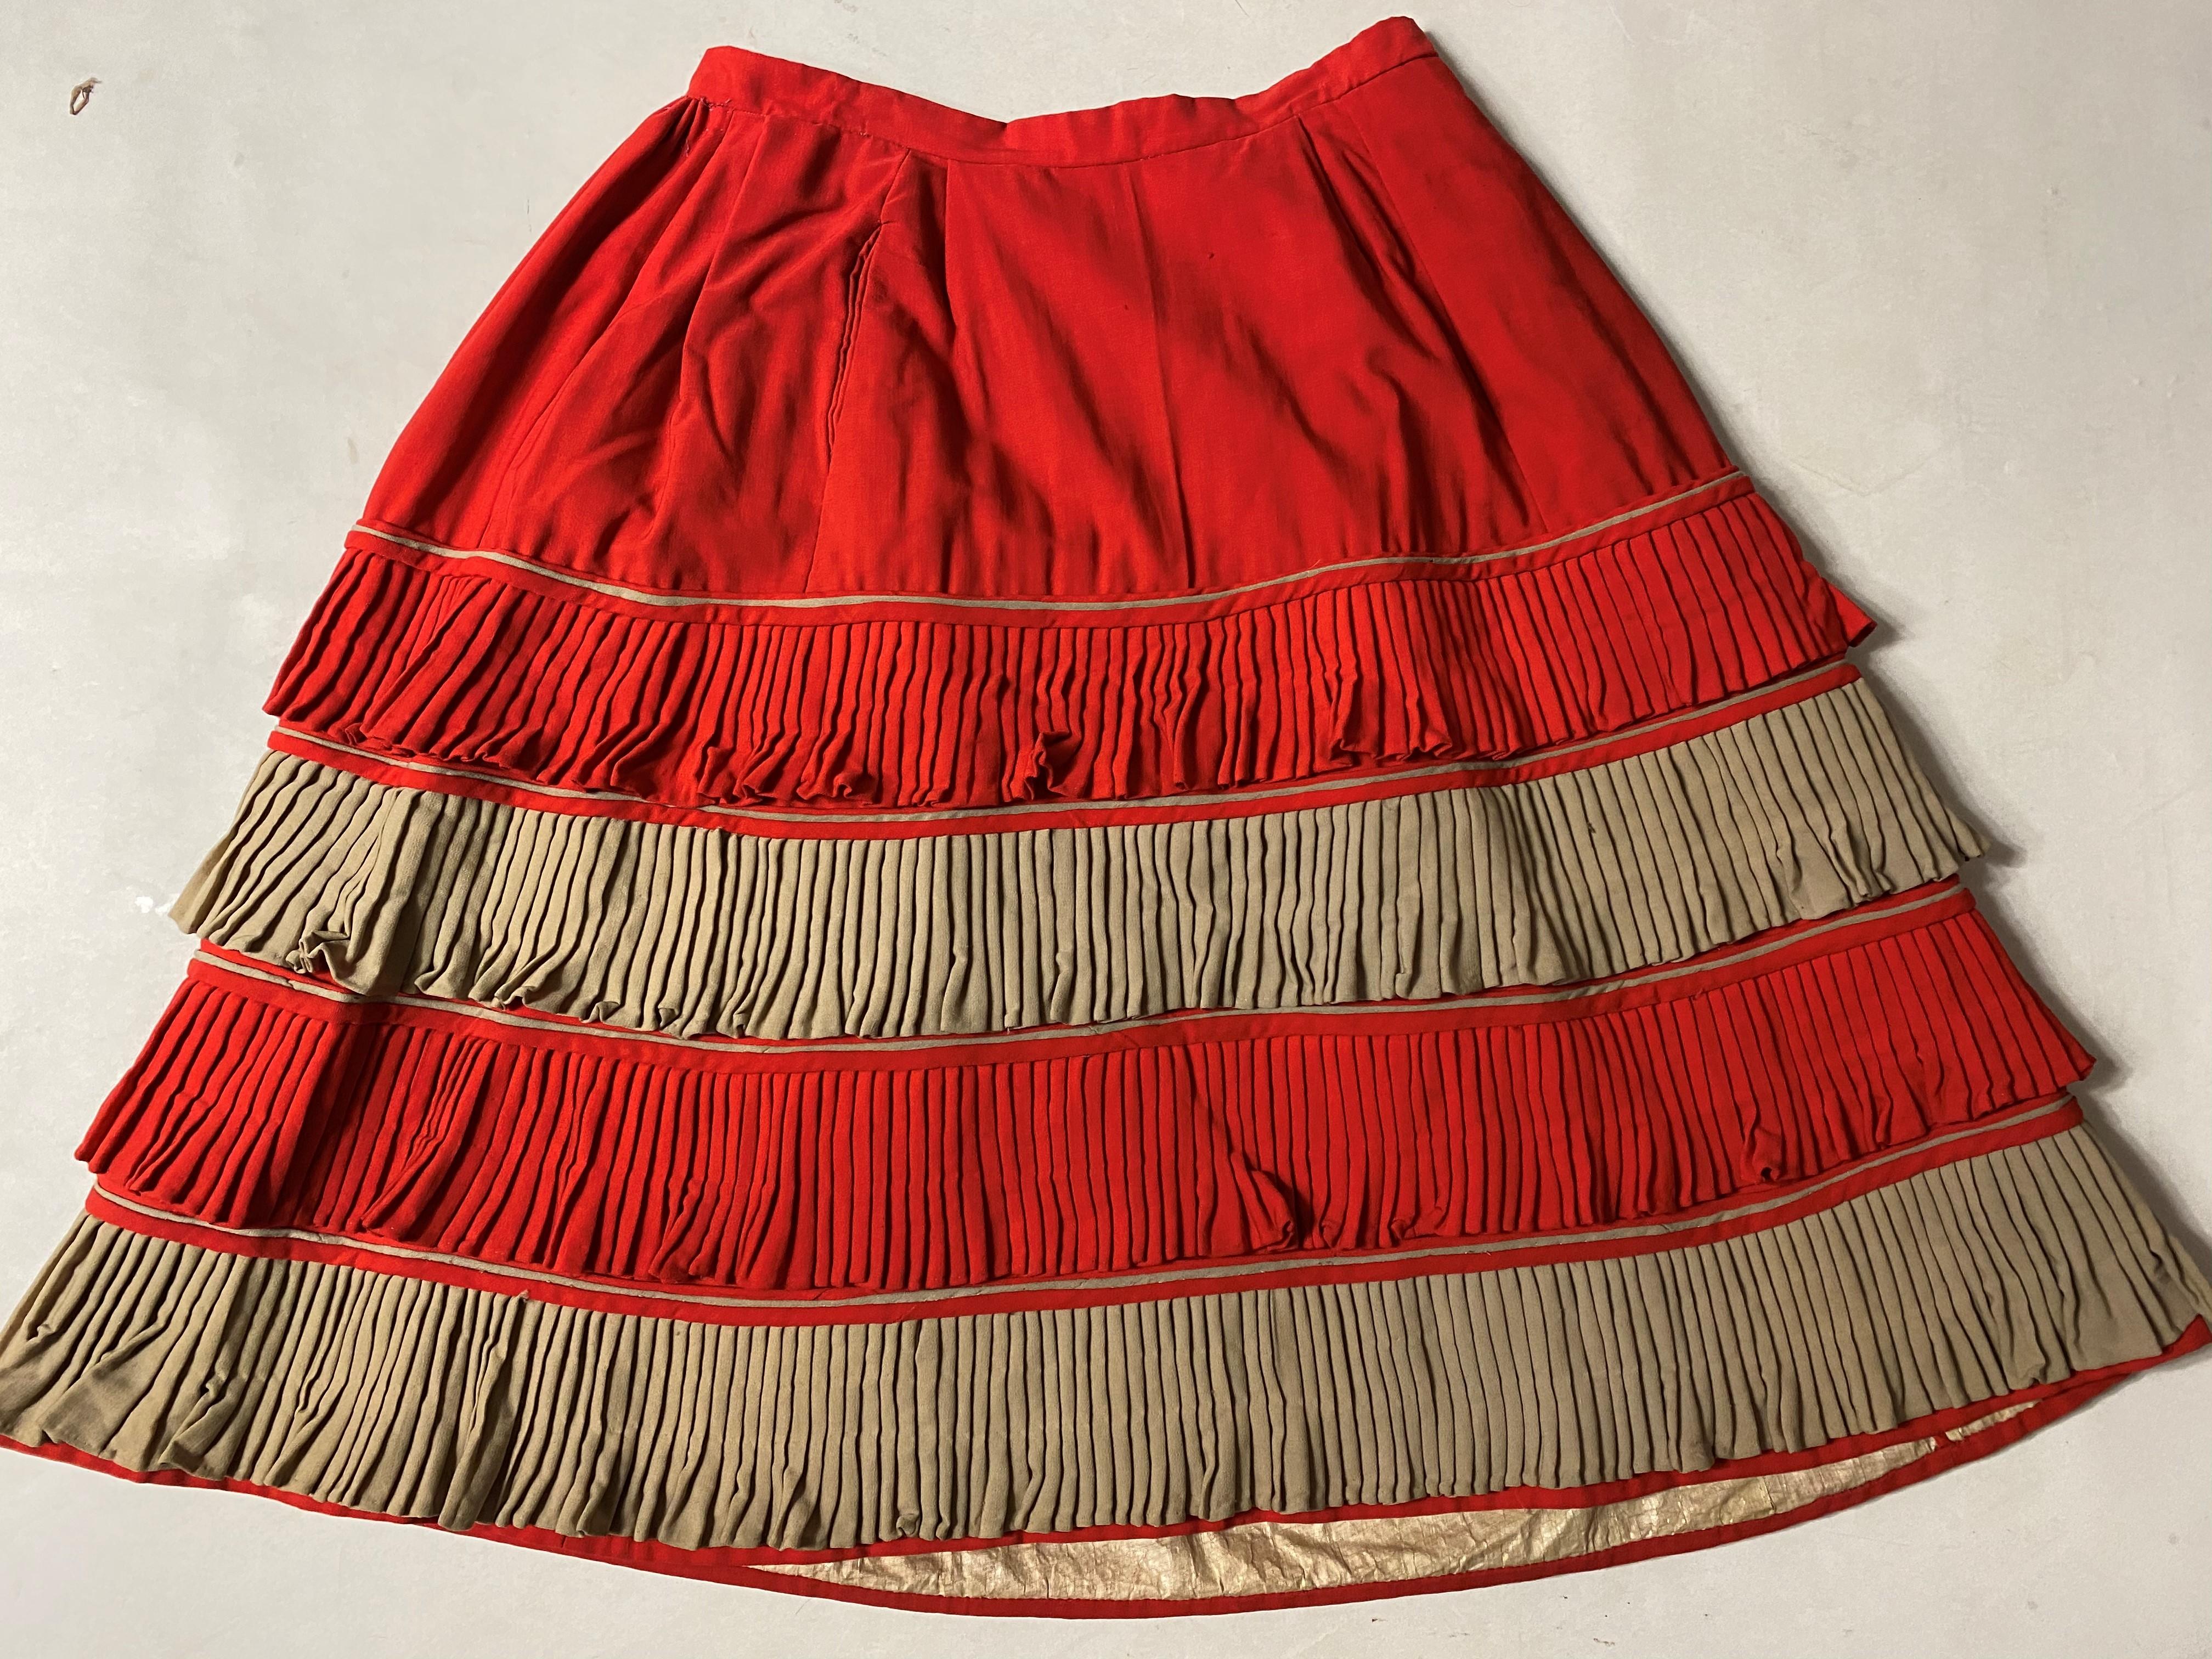 An Historical Circus, Fancy or Memorial Dress in Scarlet Challis USA Circa 1890 For Sale 4